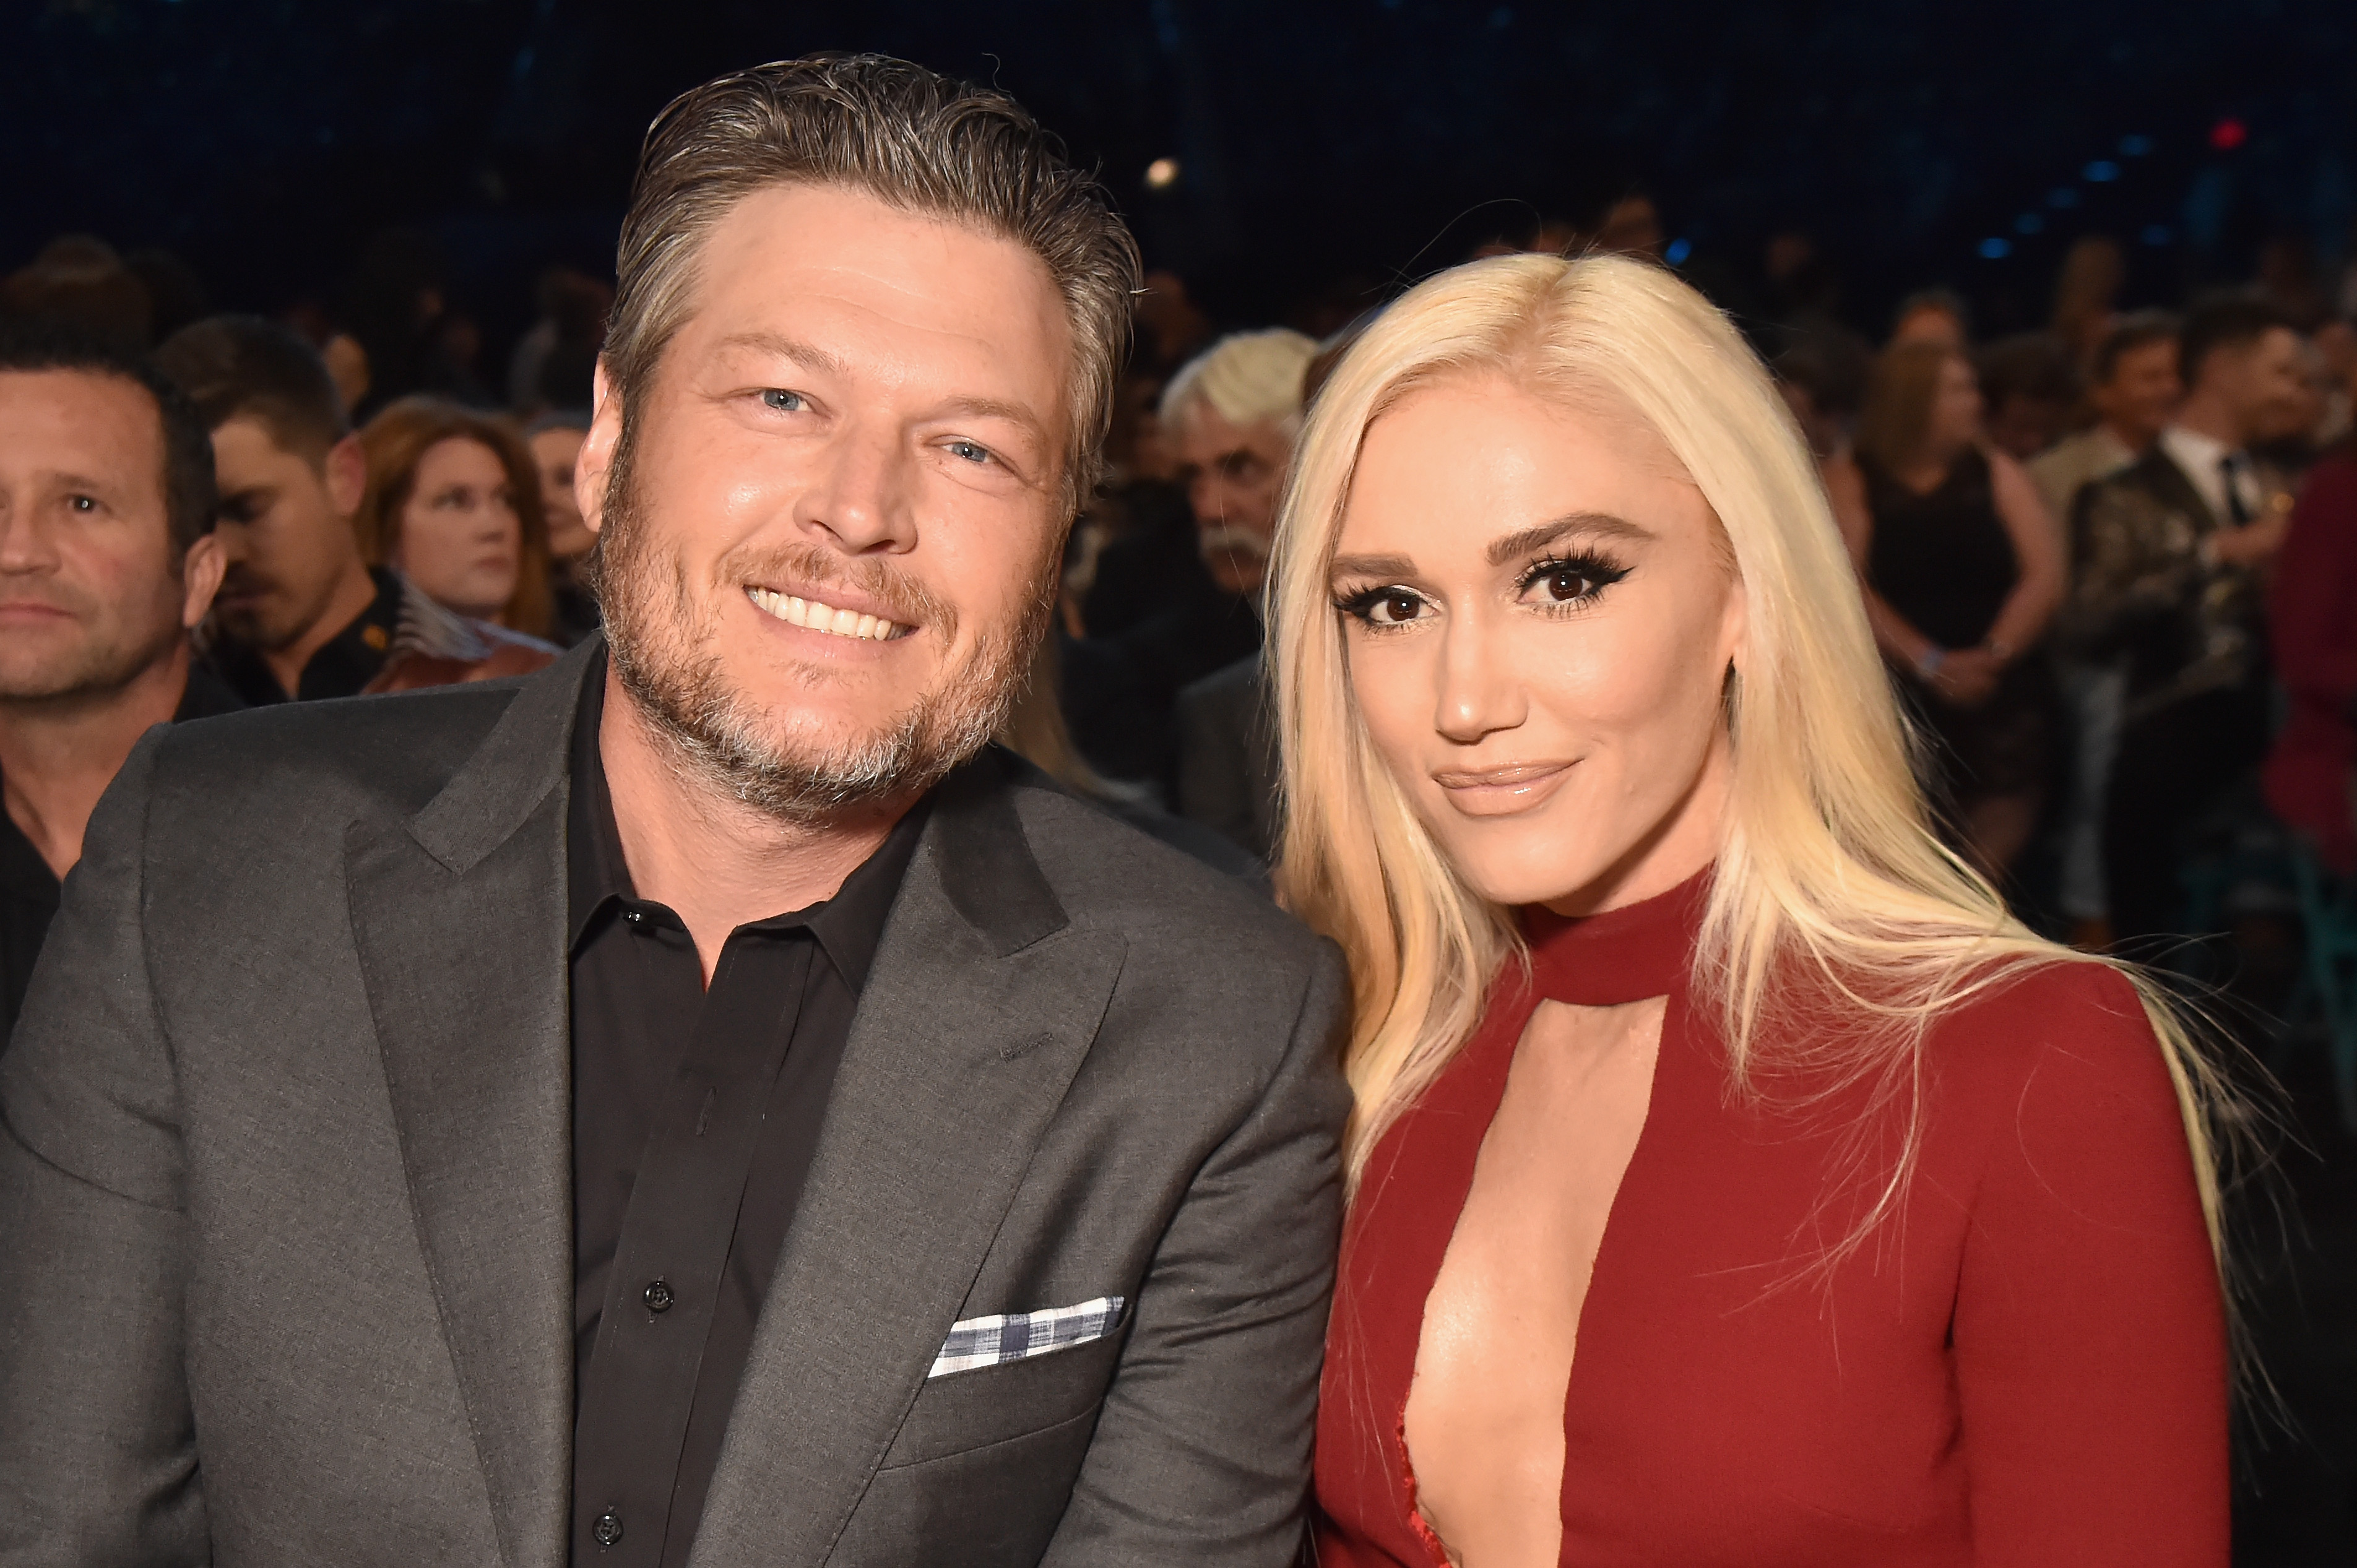 Blake Shelton and Gwen Stefani attend the 53rd Academy of Country Music Awards at MGM Grand Garden Arena in Las Vegas, Nevada, on April 15, 2018. | Source: Getty Images